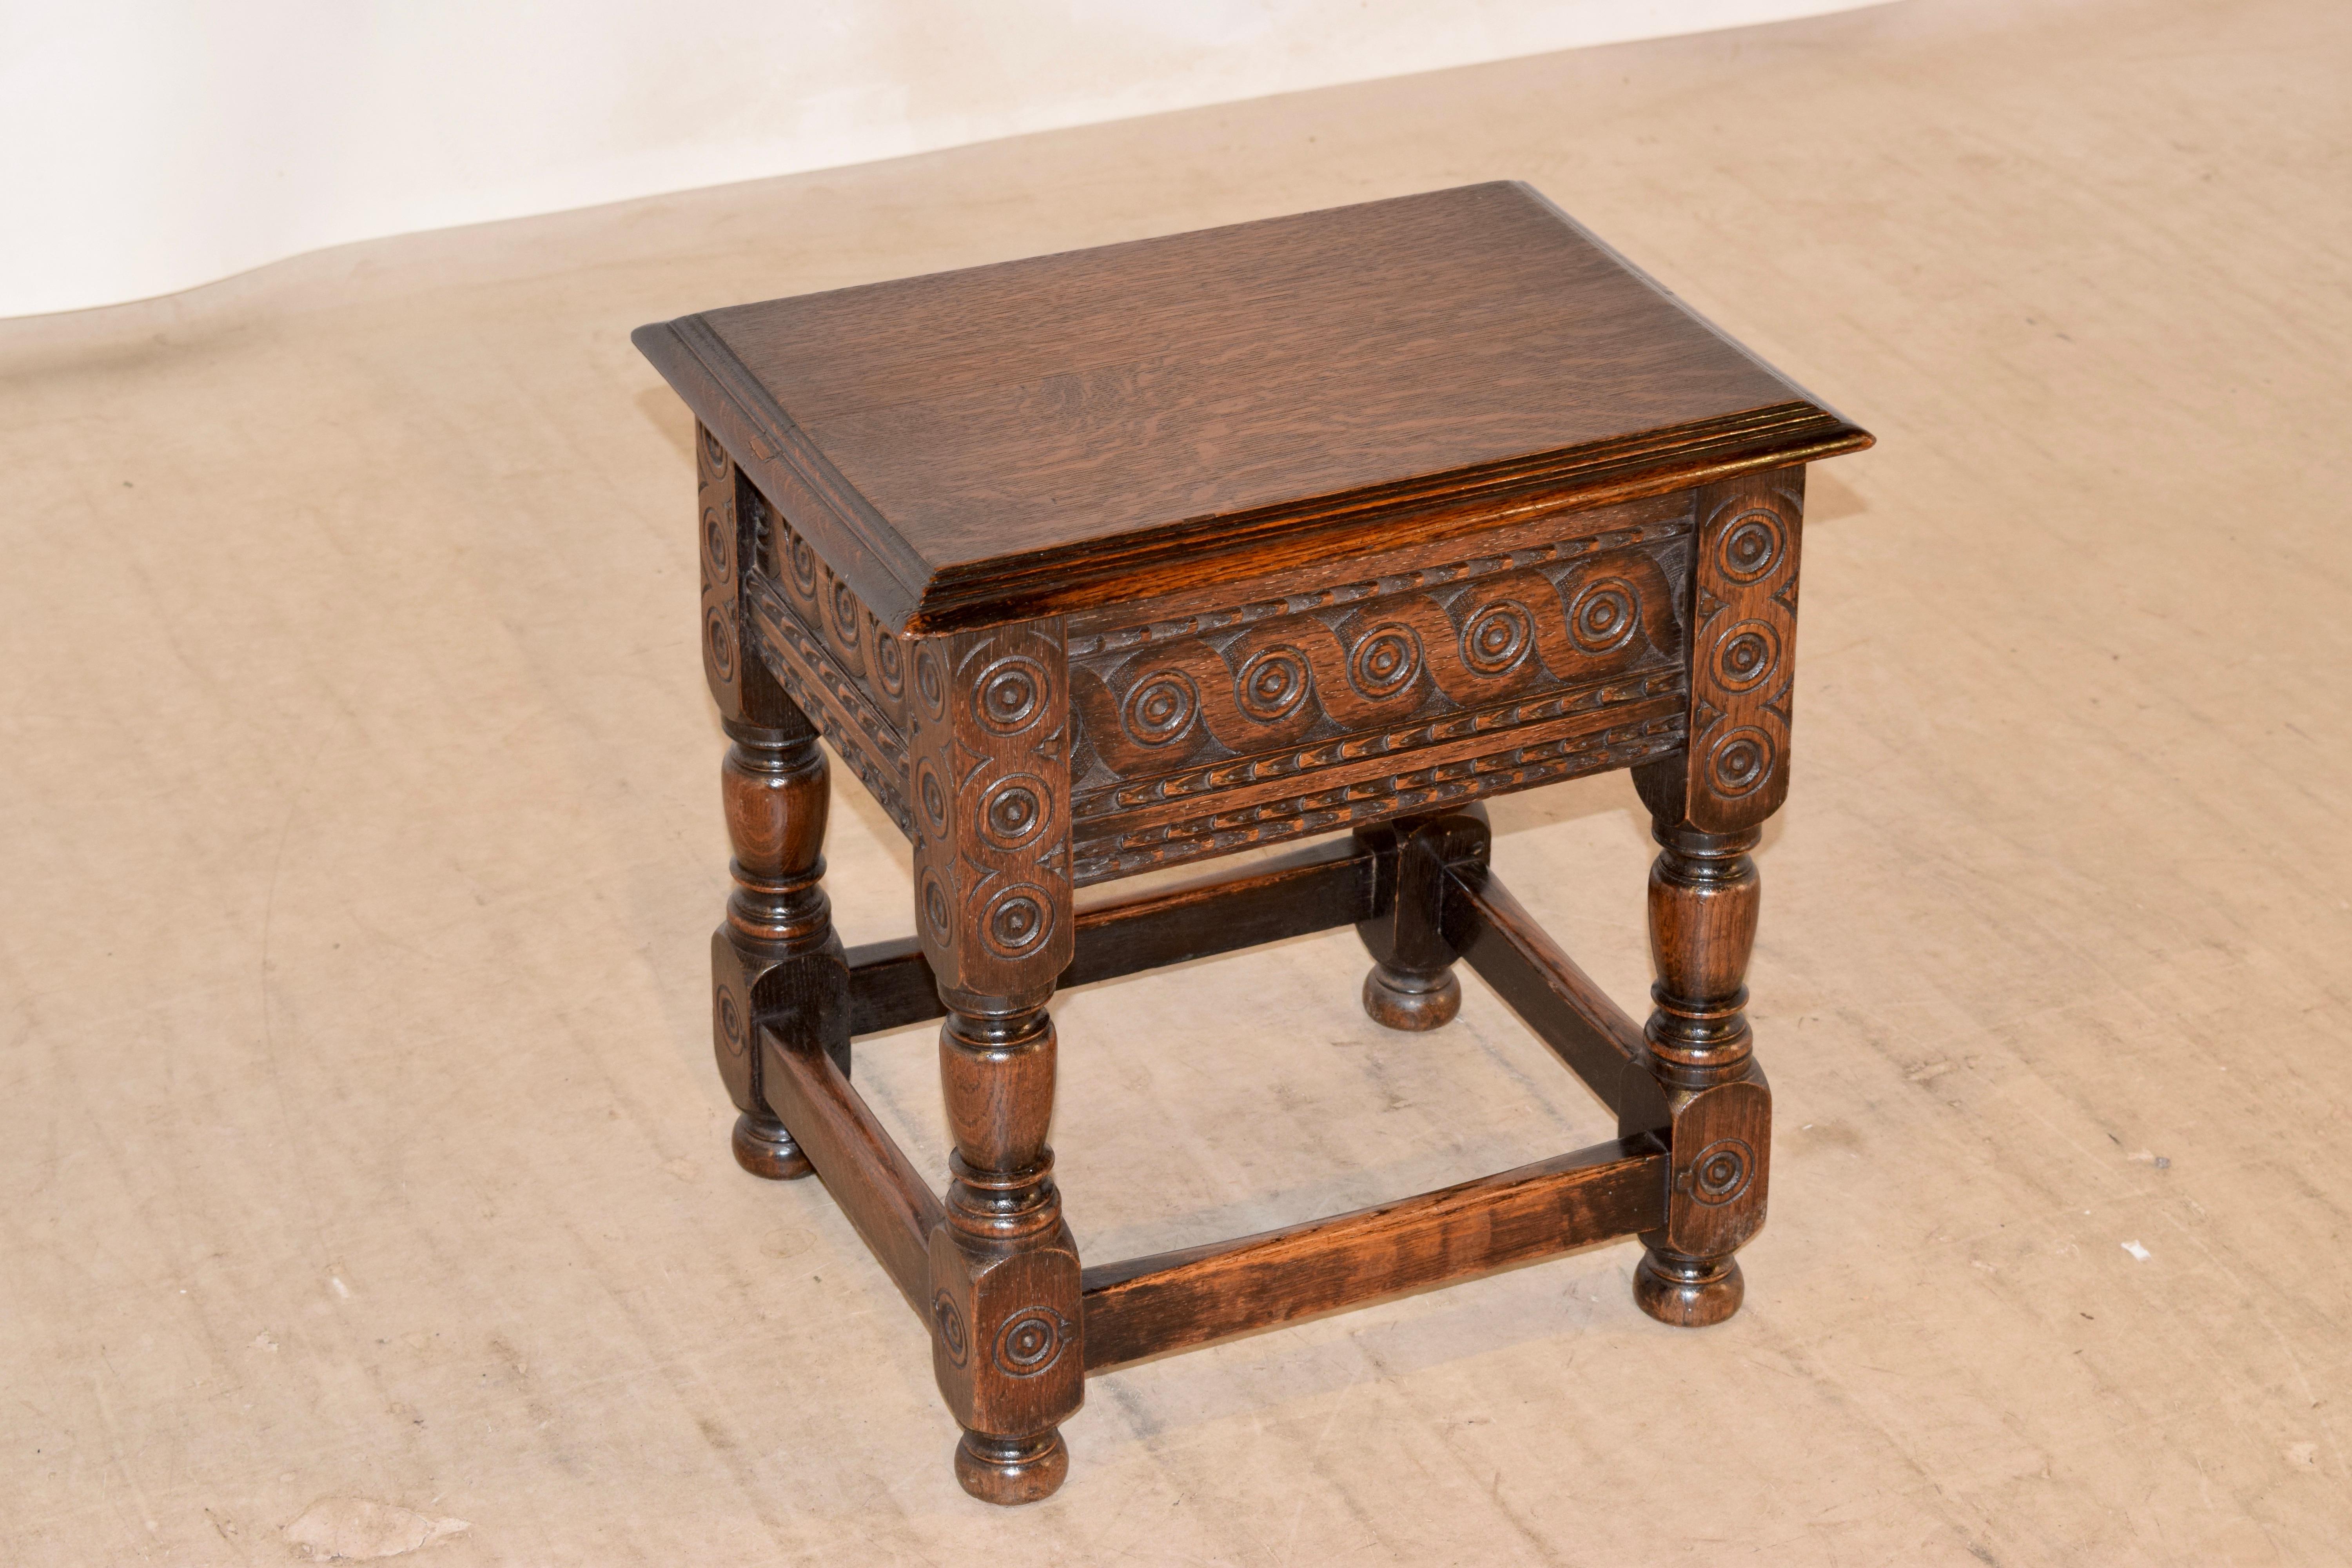 19th century oak lift-top stool from England with a beveled edge around the top, which lifts to reveal storage. The base is wonderfully hand carved and is supported on hand turned legs, joined by simple stretchers and raised on turned feet.